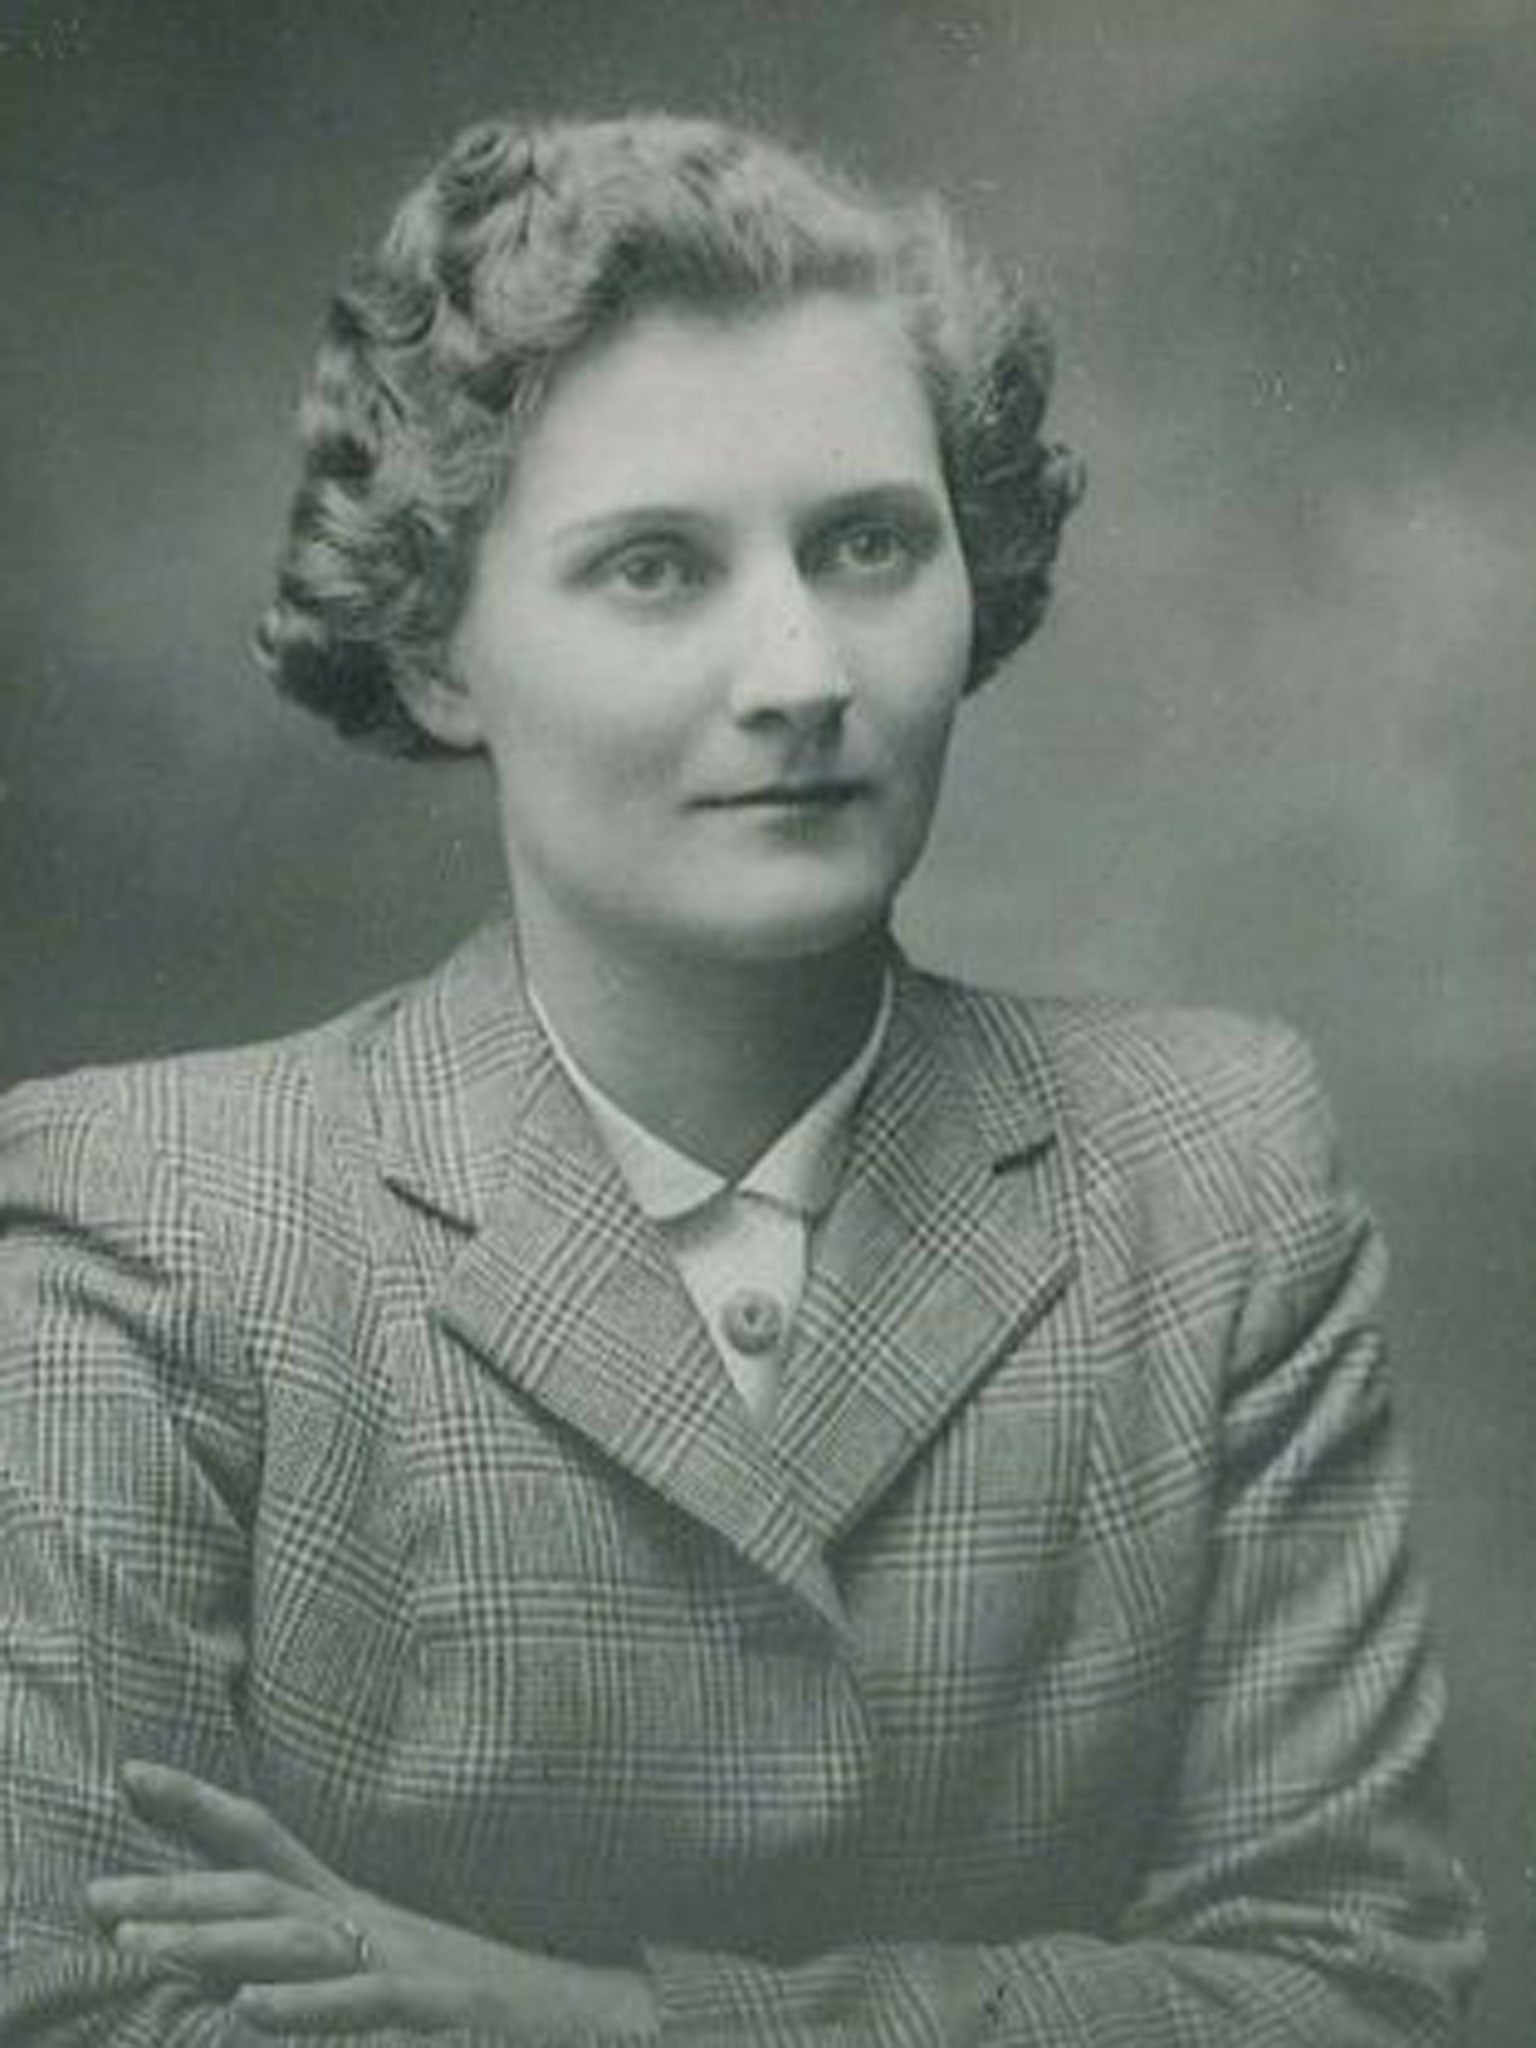 The author’s mother, Doris, around the time of her marriage in 1940